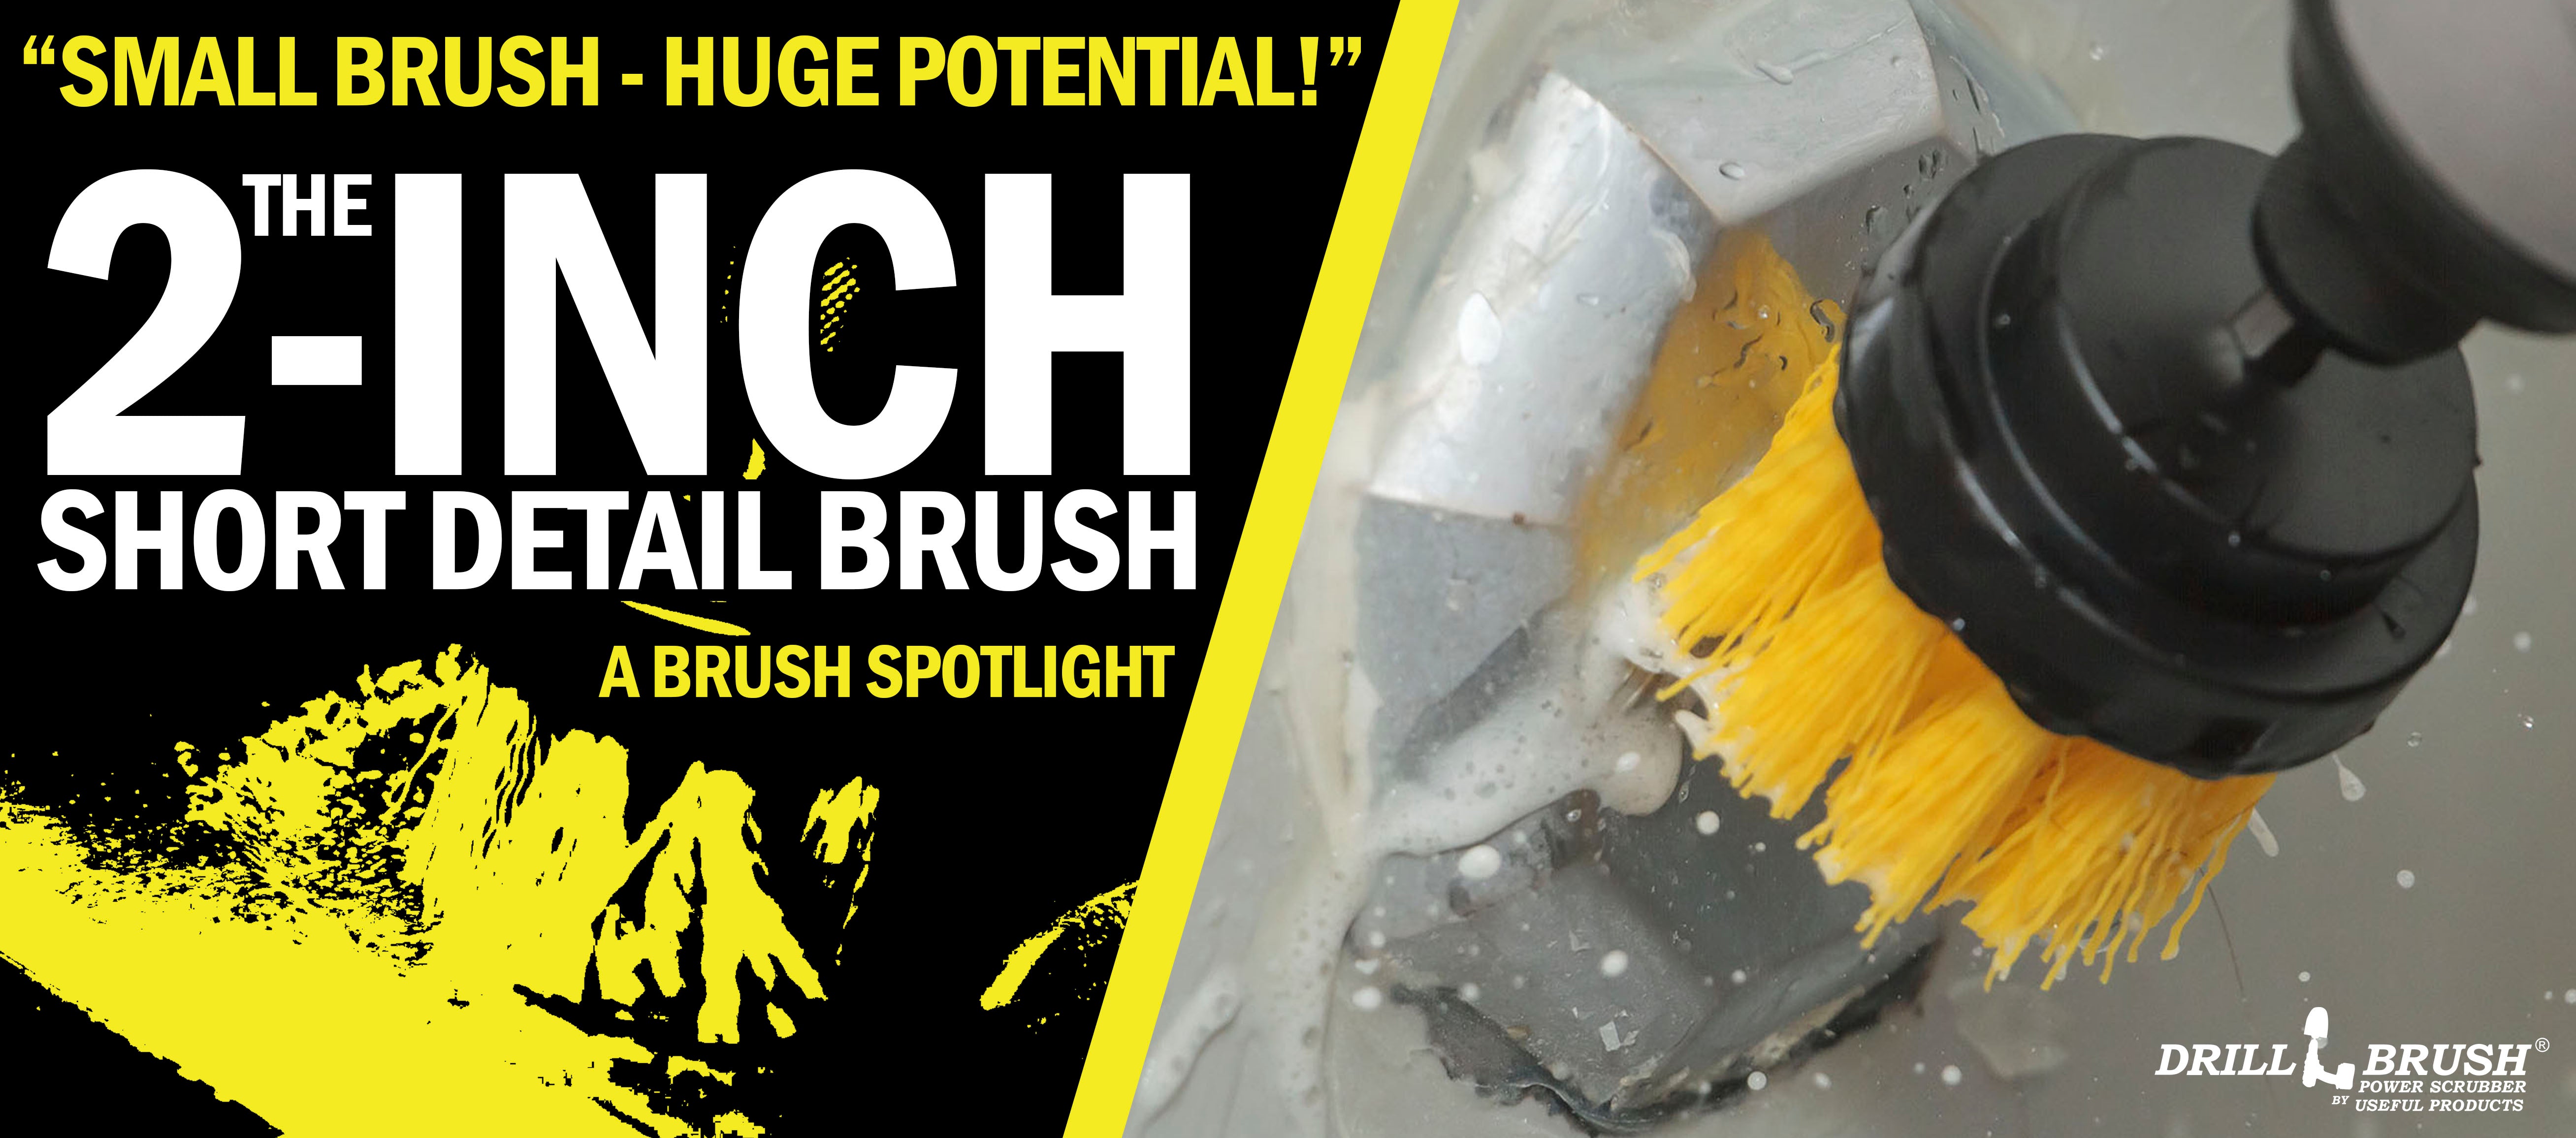 The Drillbrush 2 inch Short Detail Brush - A Certified Spot Cleaning Machine!